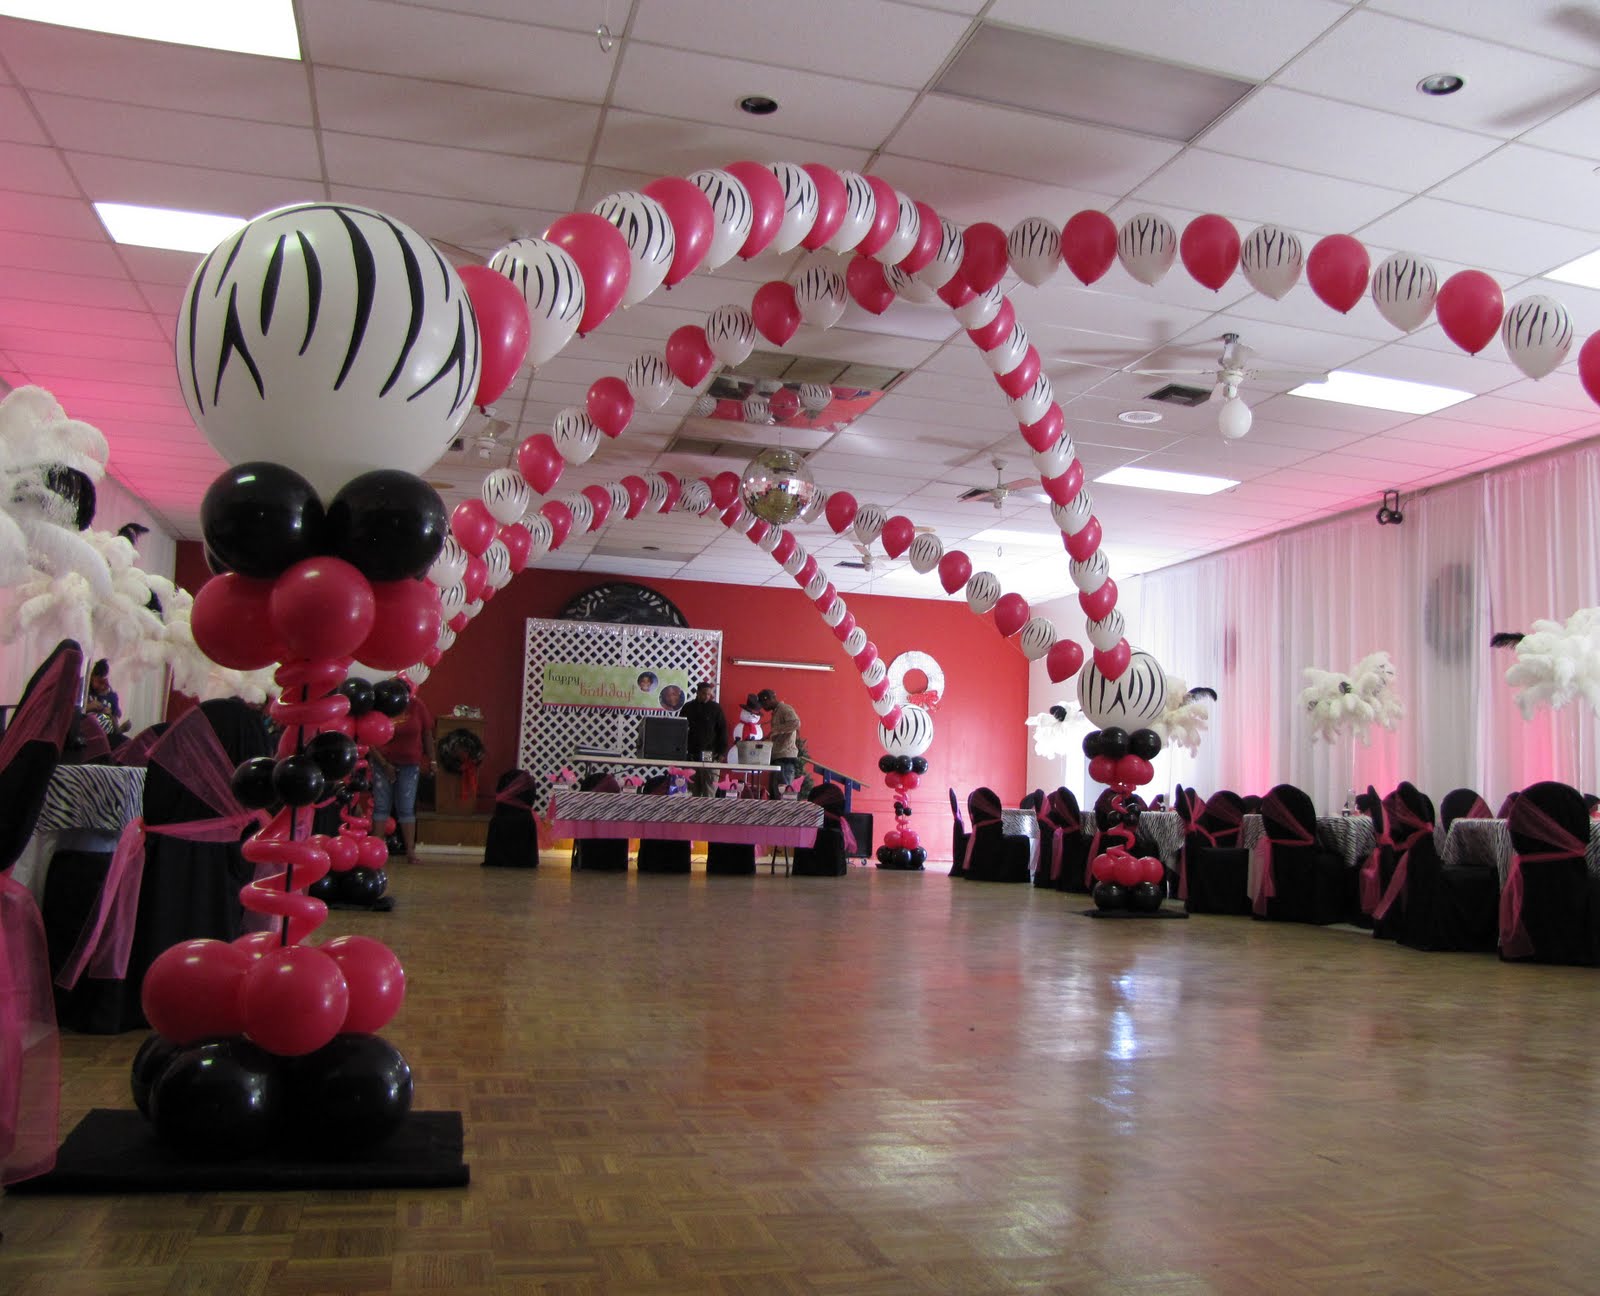  Sweet  16  bday party  on Pinterest Sweet  16  Centerpieces 